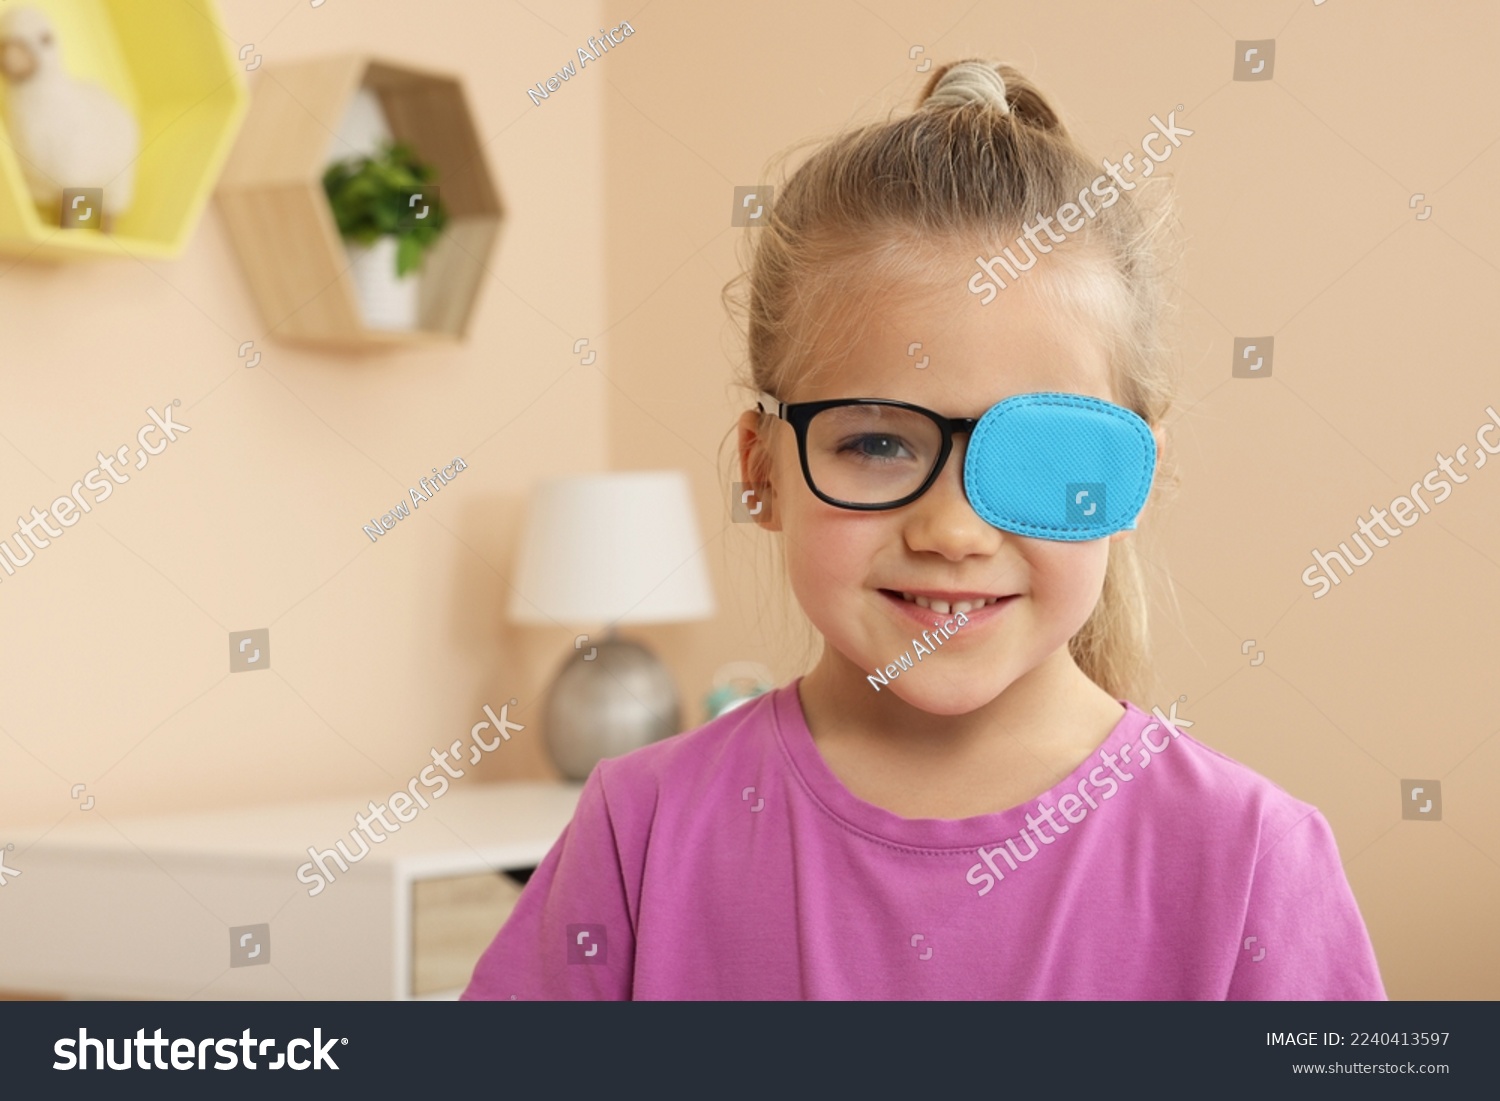 Girl with eye patch on glasses in room, space for text. Strabismus treatment #2240413597